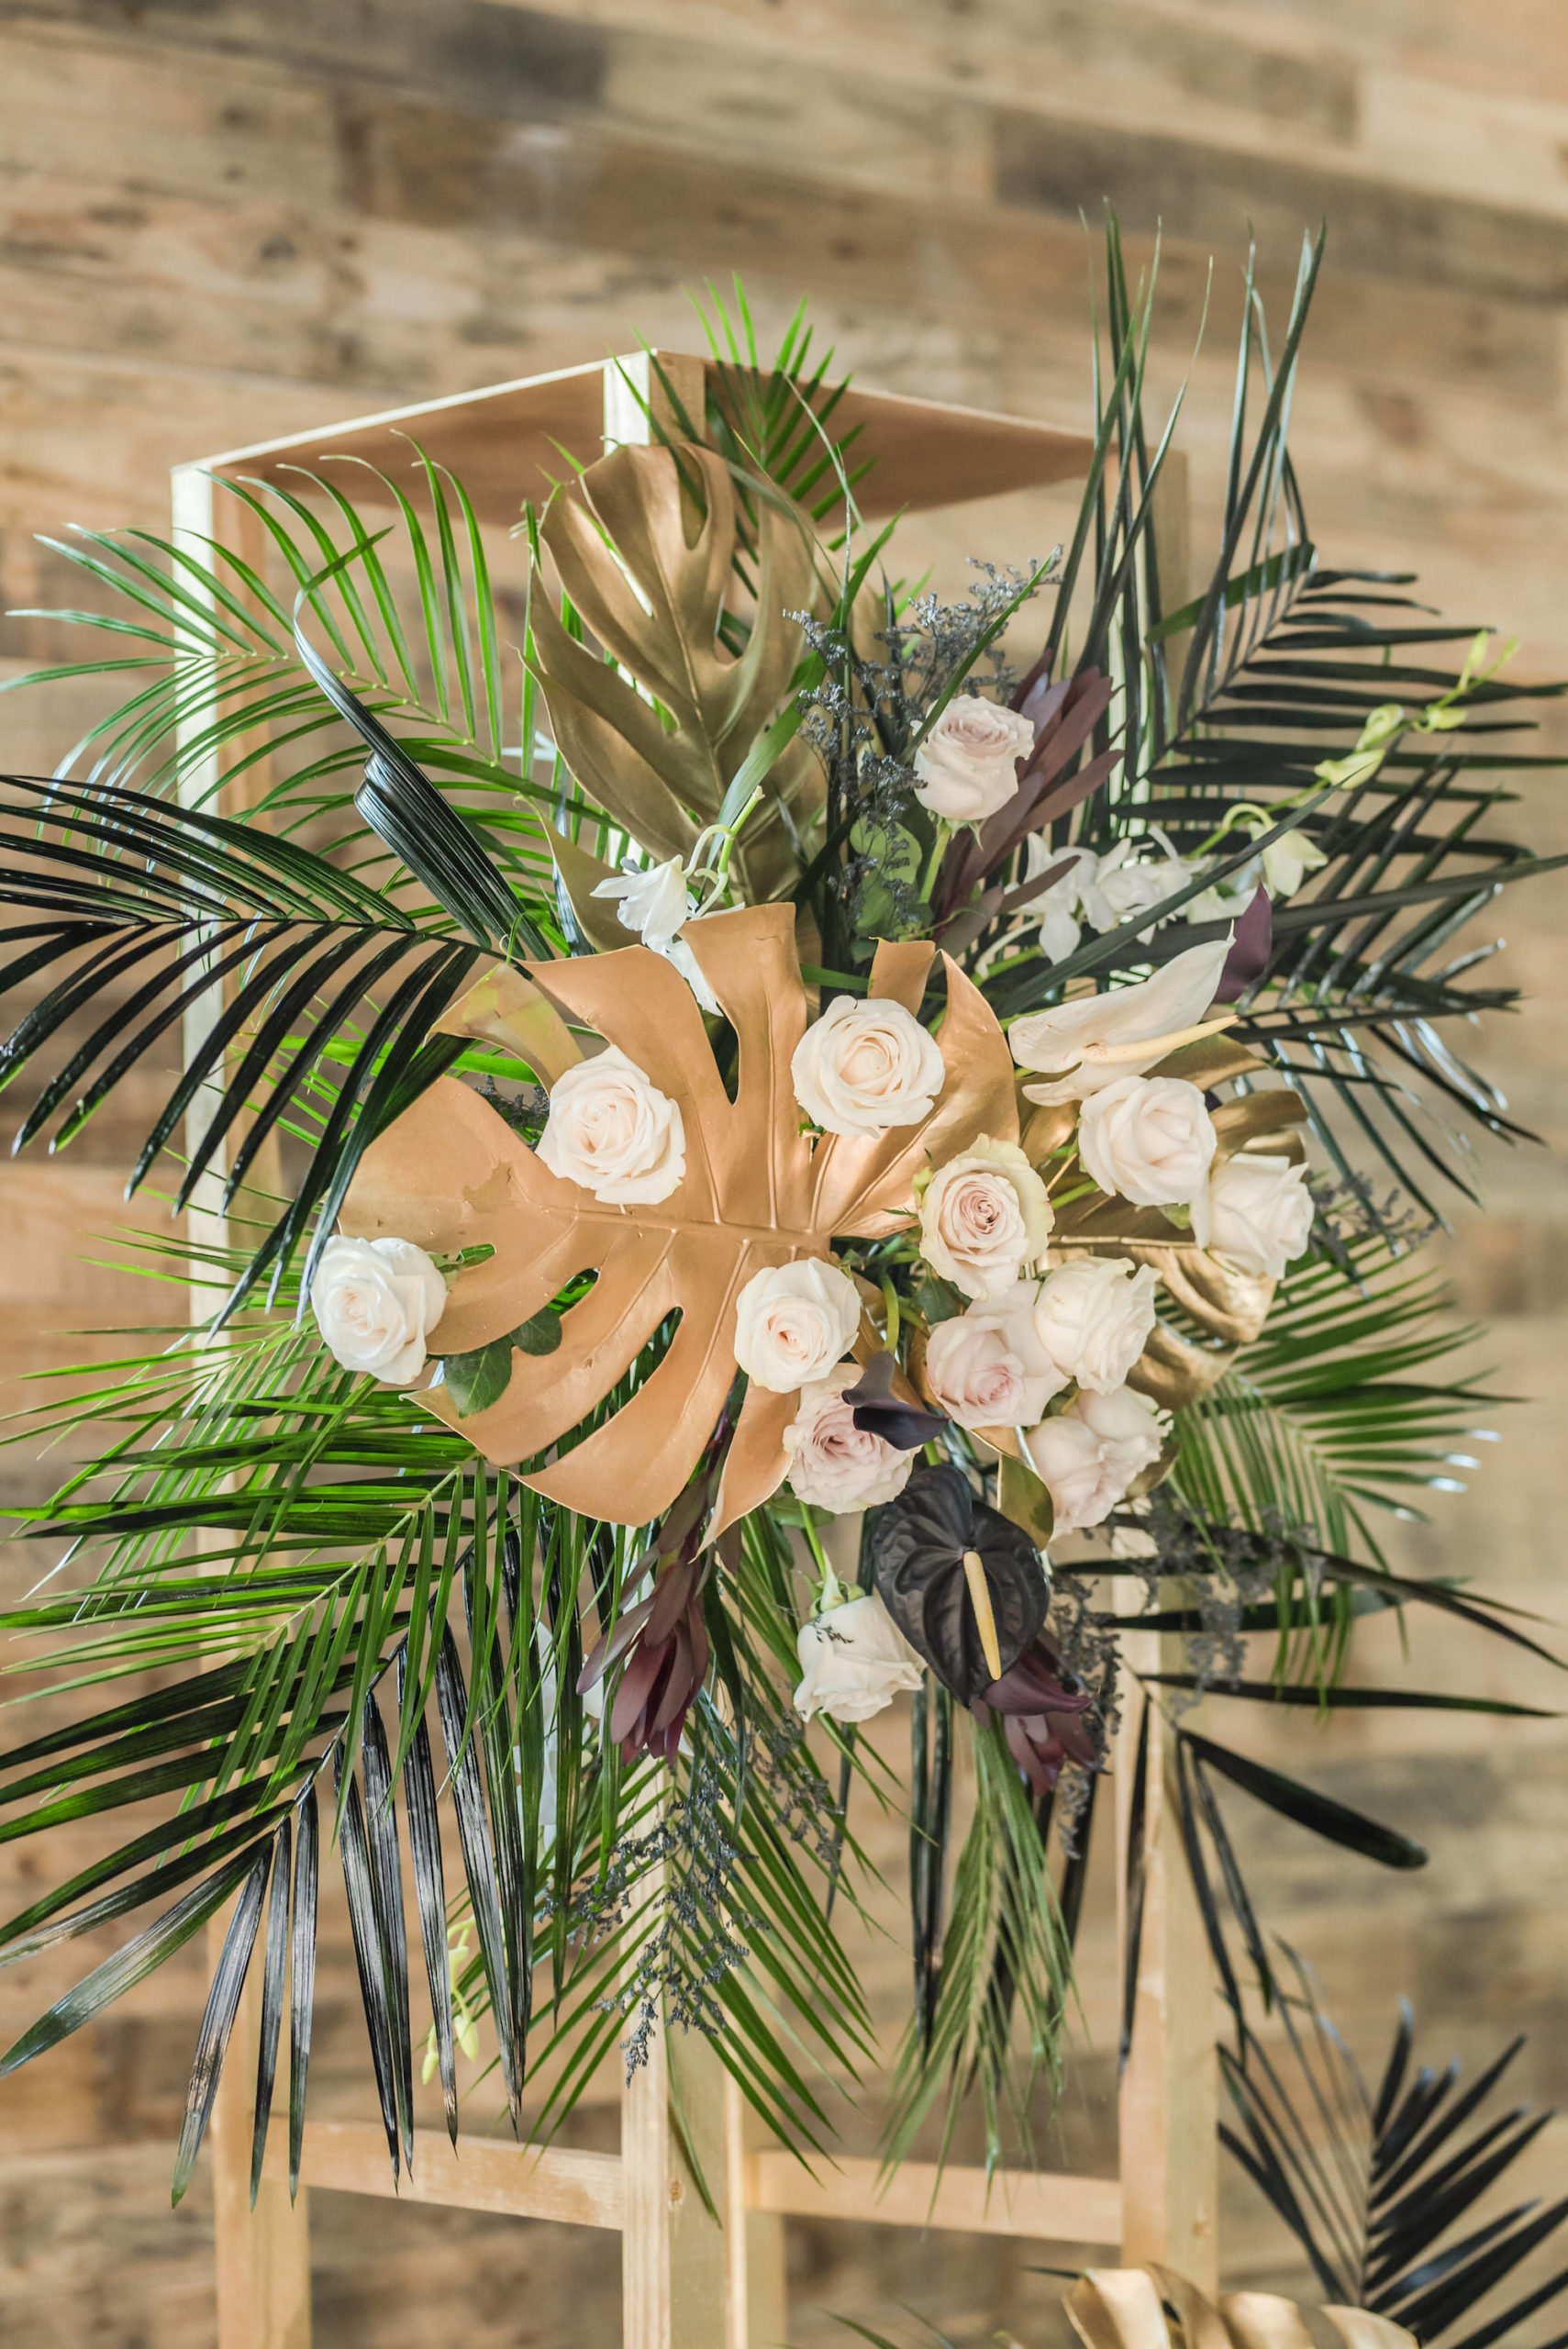 Dark Luxe, Romantic Wedding Styled Shoot, Tall Gold Geometric Stand with White and Blush Pink Roses, Palm Fronds and Gold Monstera Leaves, Gold Lantern | Tampa Bay Wedding Planner Elegant Affairs by Design | Madeira Beach Wedding Venue The West Events Sapce